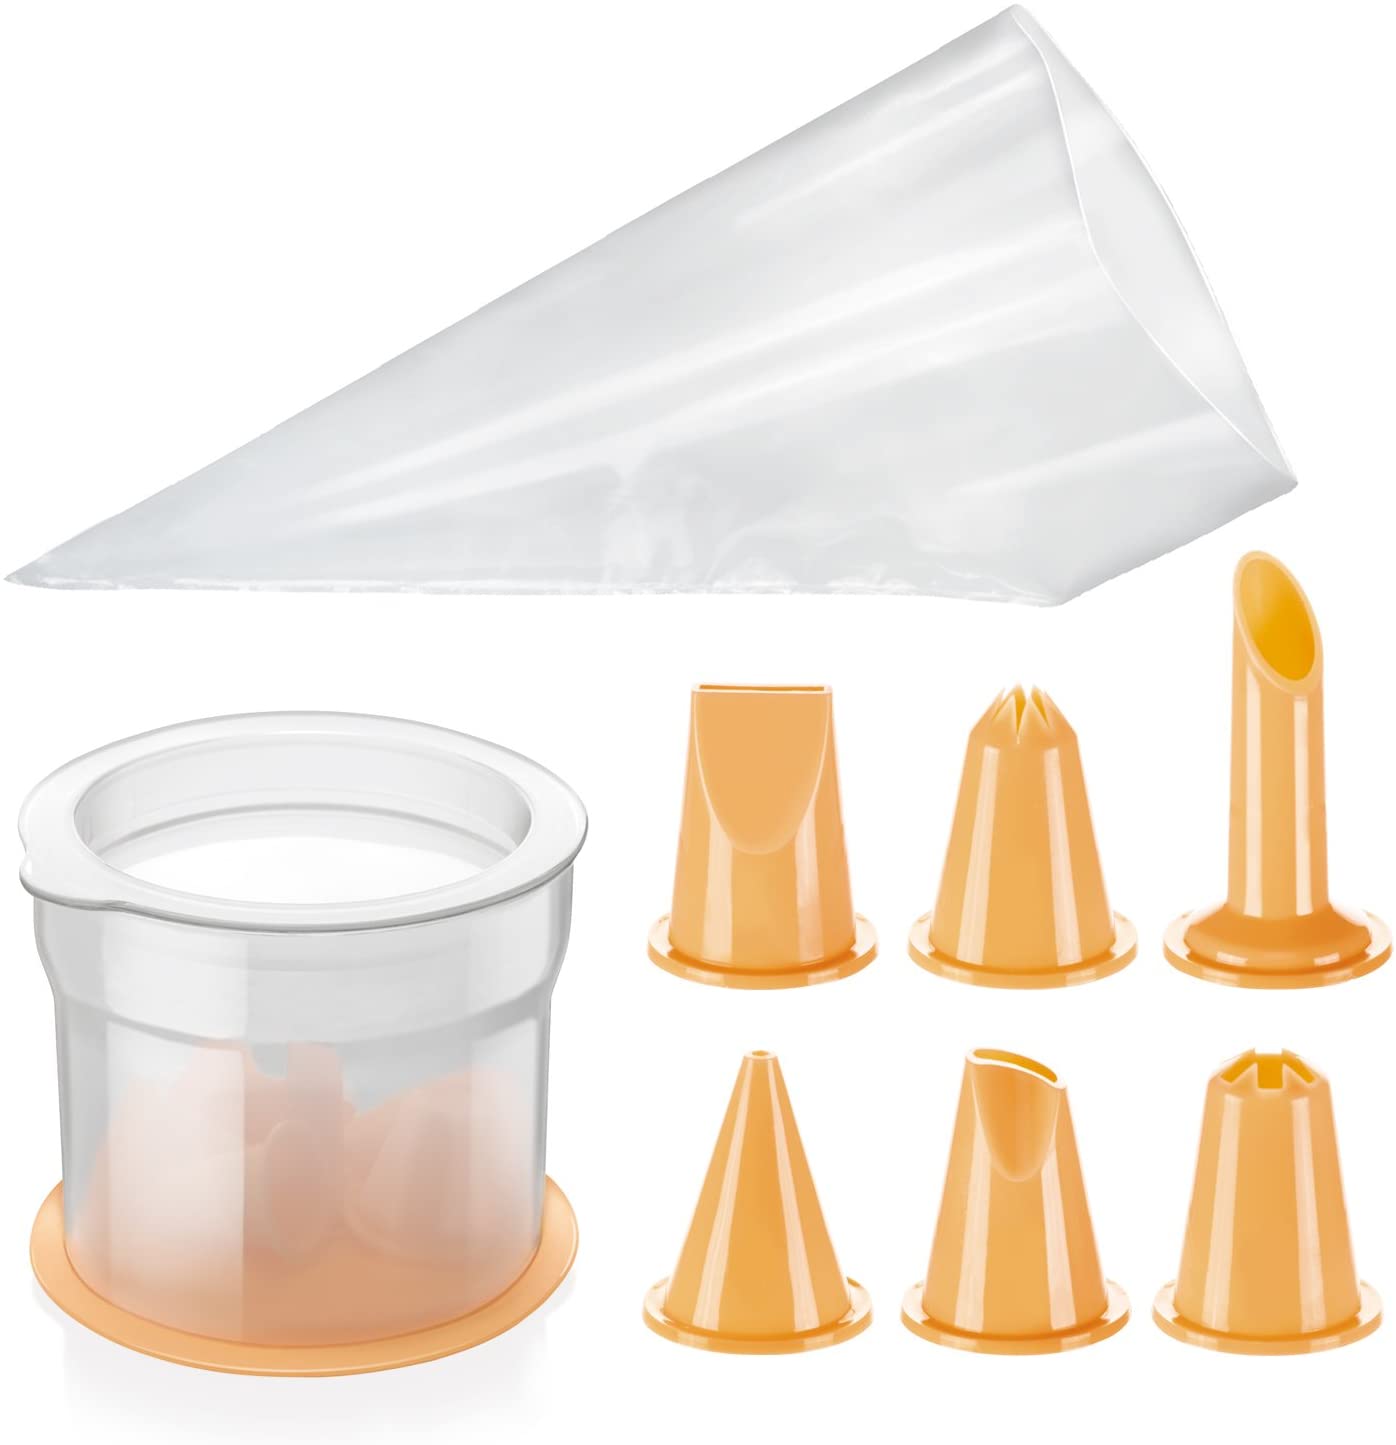 Tescoma Delicia Pastry Bag Nozzles and Base, Plastic, Clear/Yellow, 29 x 18 x 9.9 cm